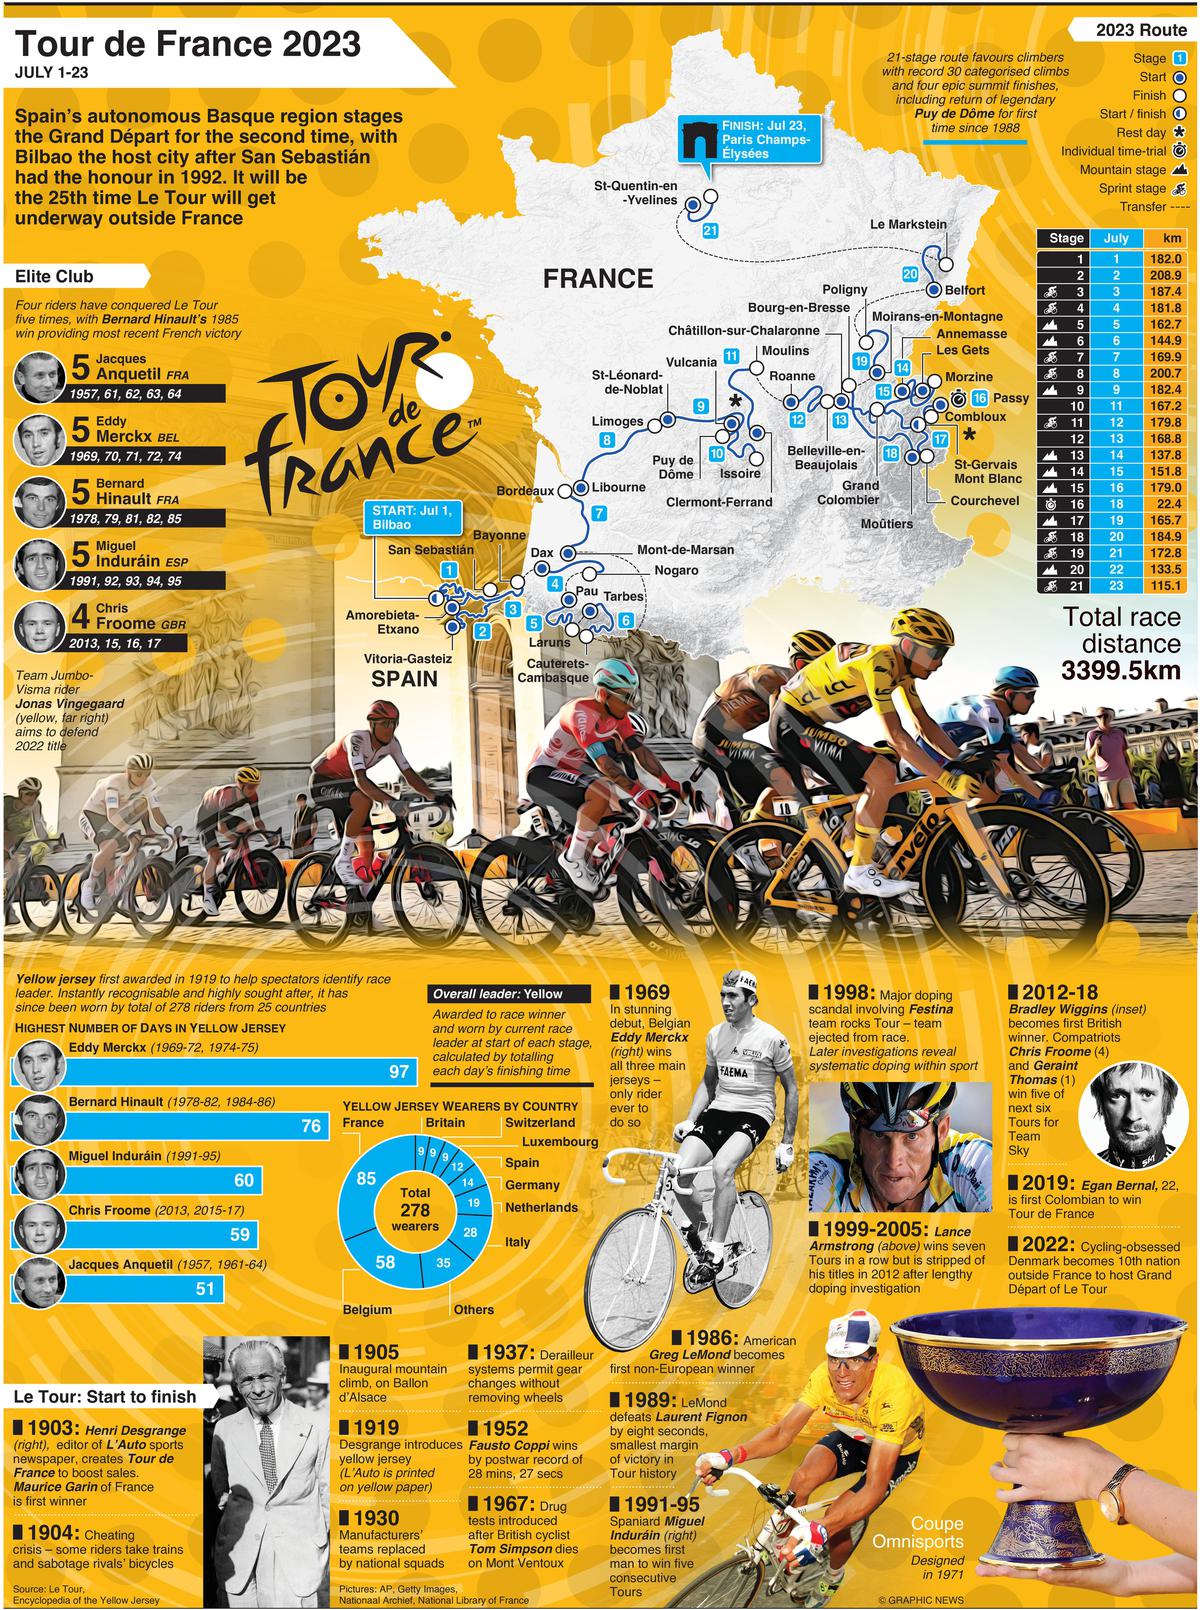 Tour de France 2023 All you need to know about the race, timings, stages, live streaming info